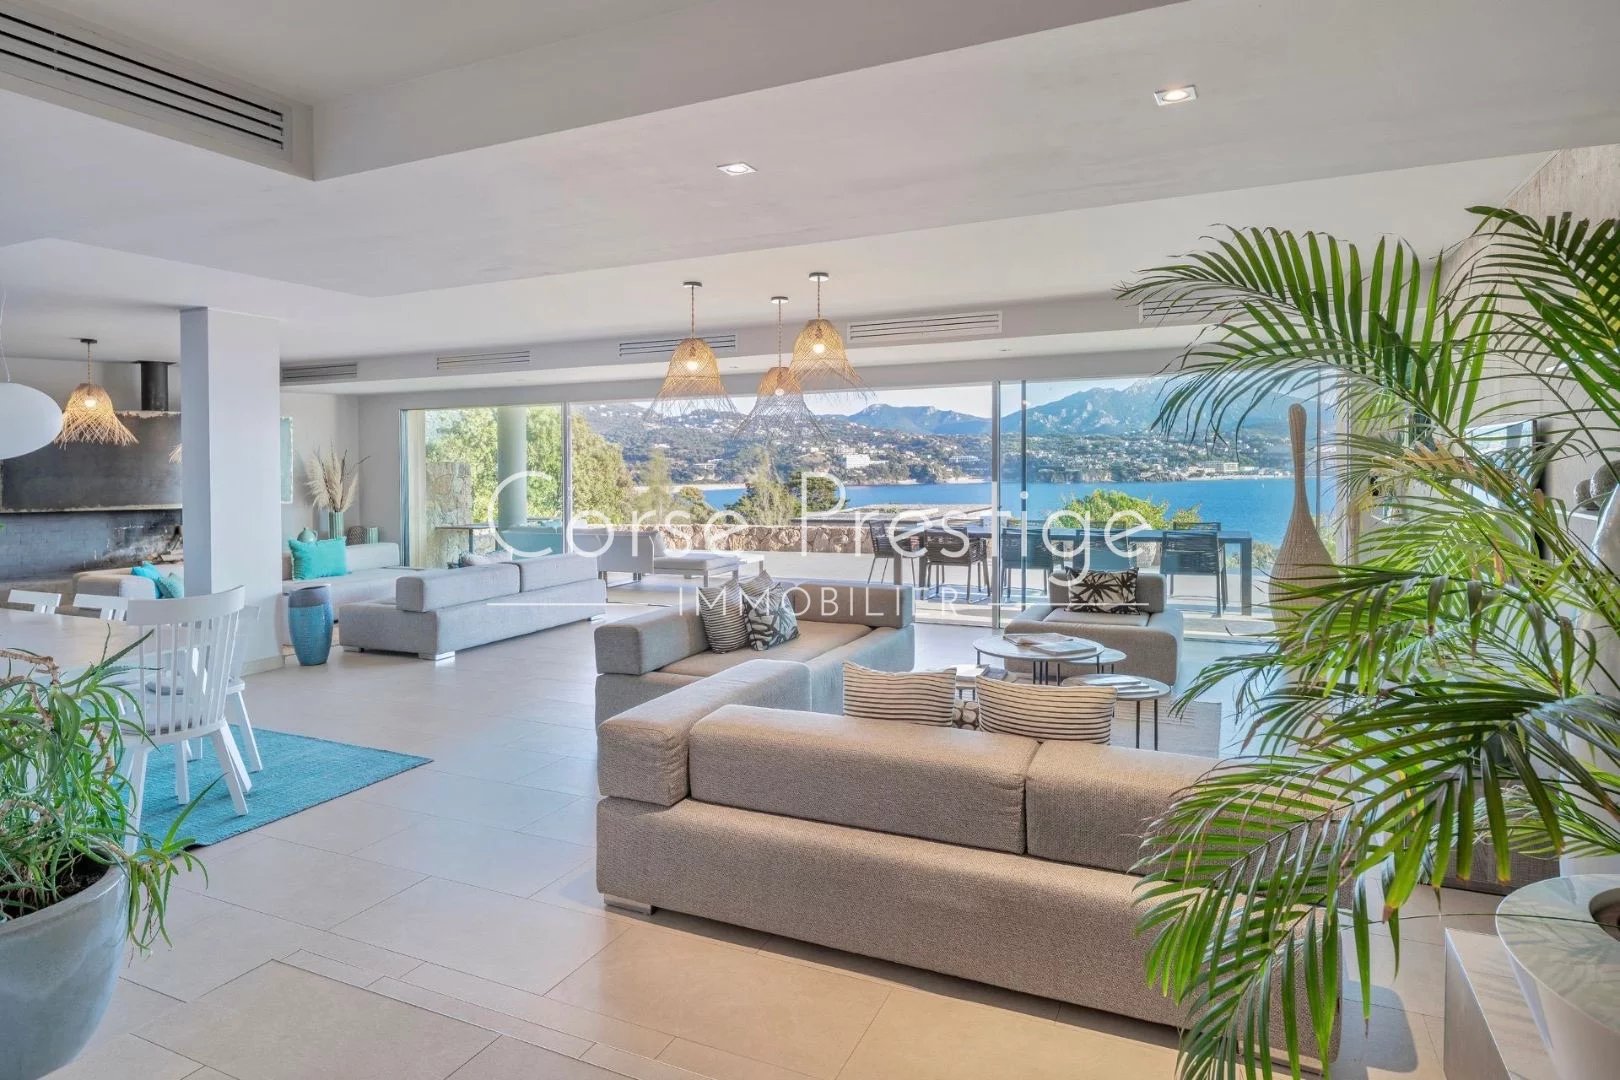 waterfront luxury villa for rent in corsica - propriano image4